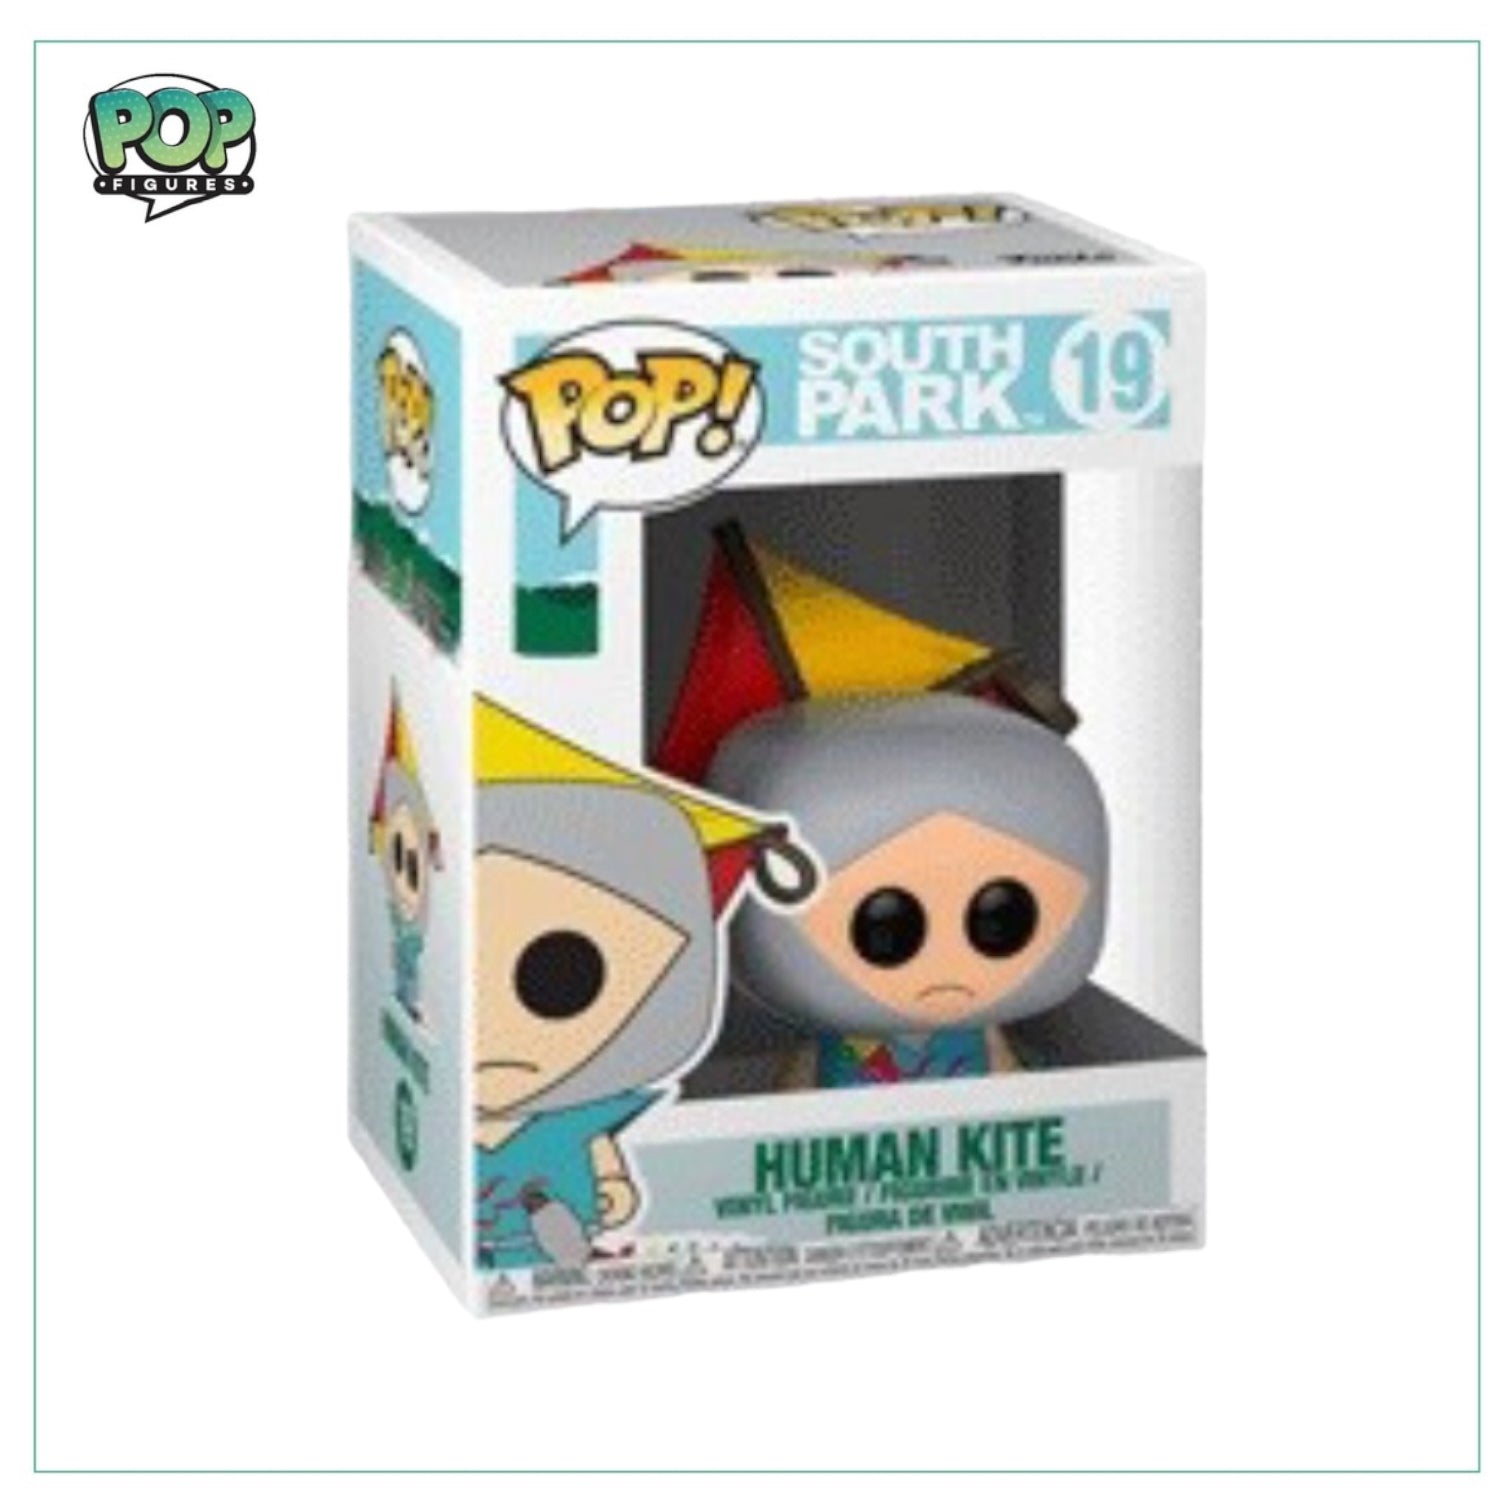 Human Kite #19 Funko Pop! - South Park - Angry Cat